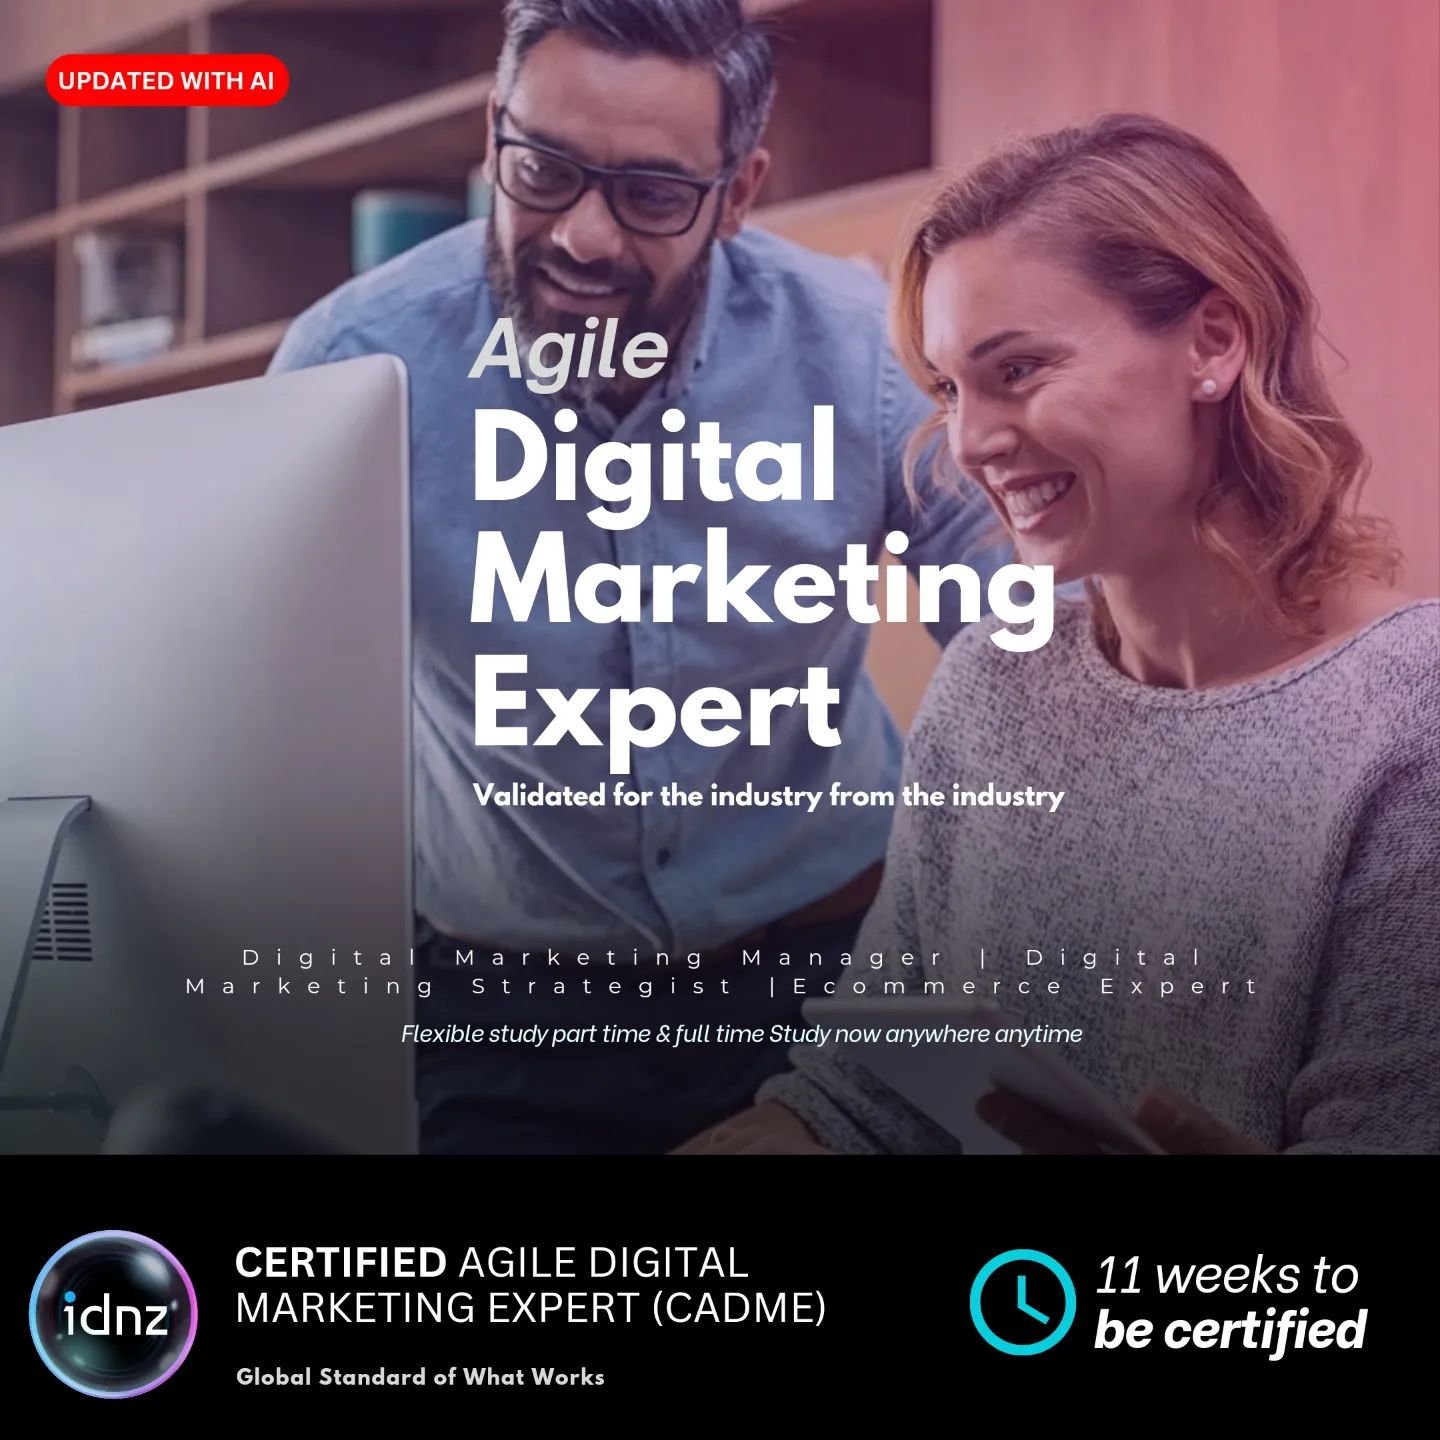 🖐🏼Stop Chasing Trends | Master Agile Marketing that Adapts &amp; Thrives.

Is your digital marketing stuck in a slow, outdated cycle?

Imagine responding to market shifts in real-time, crafting data-driven campaigns with laser focus, and achieving 